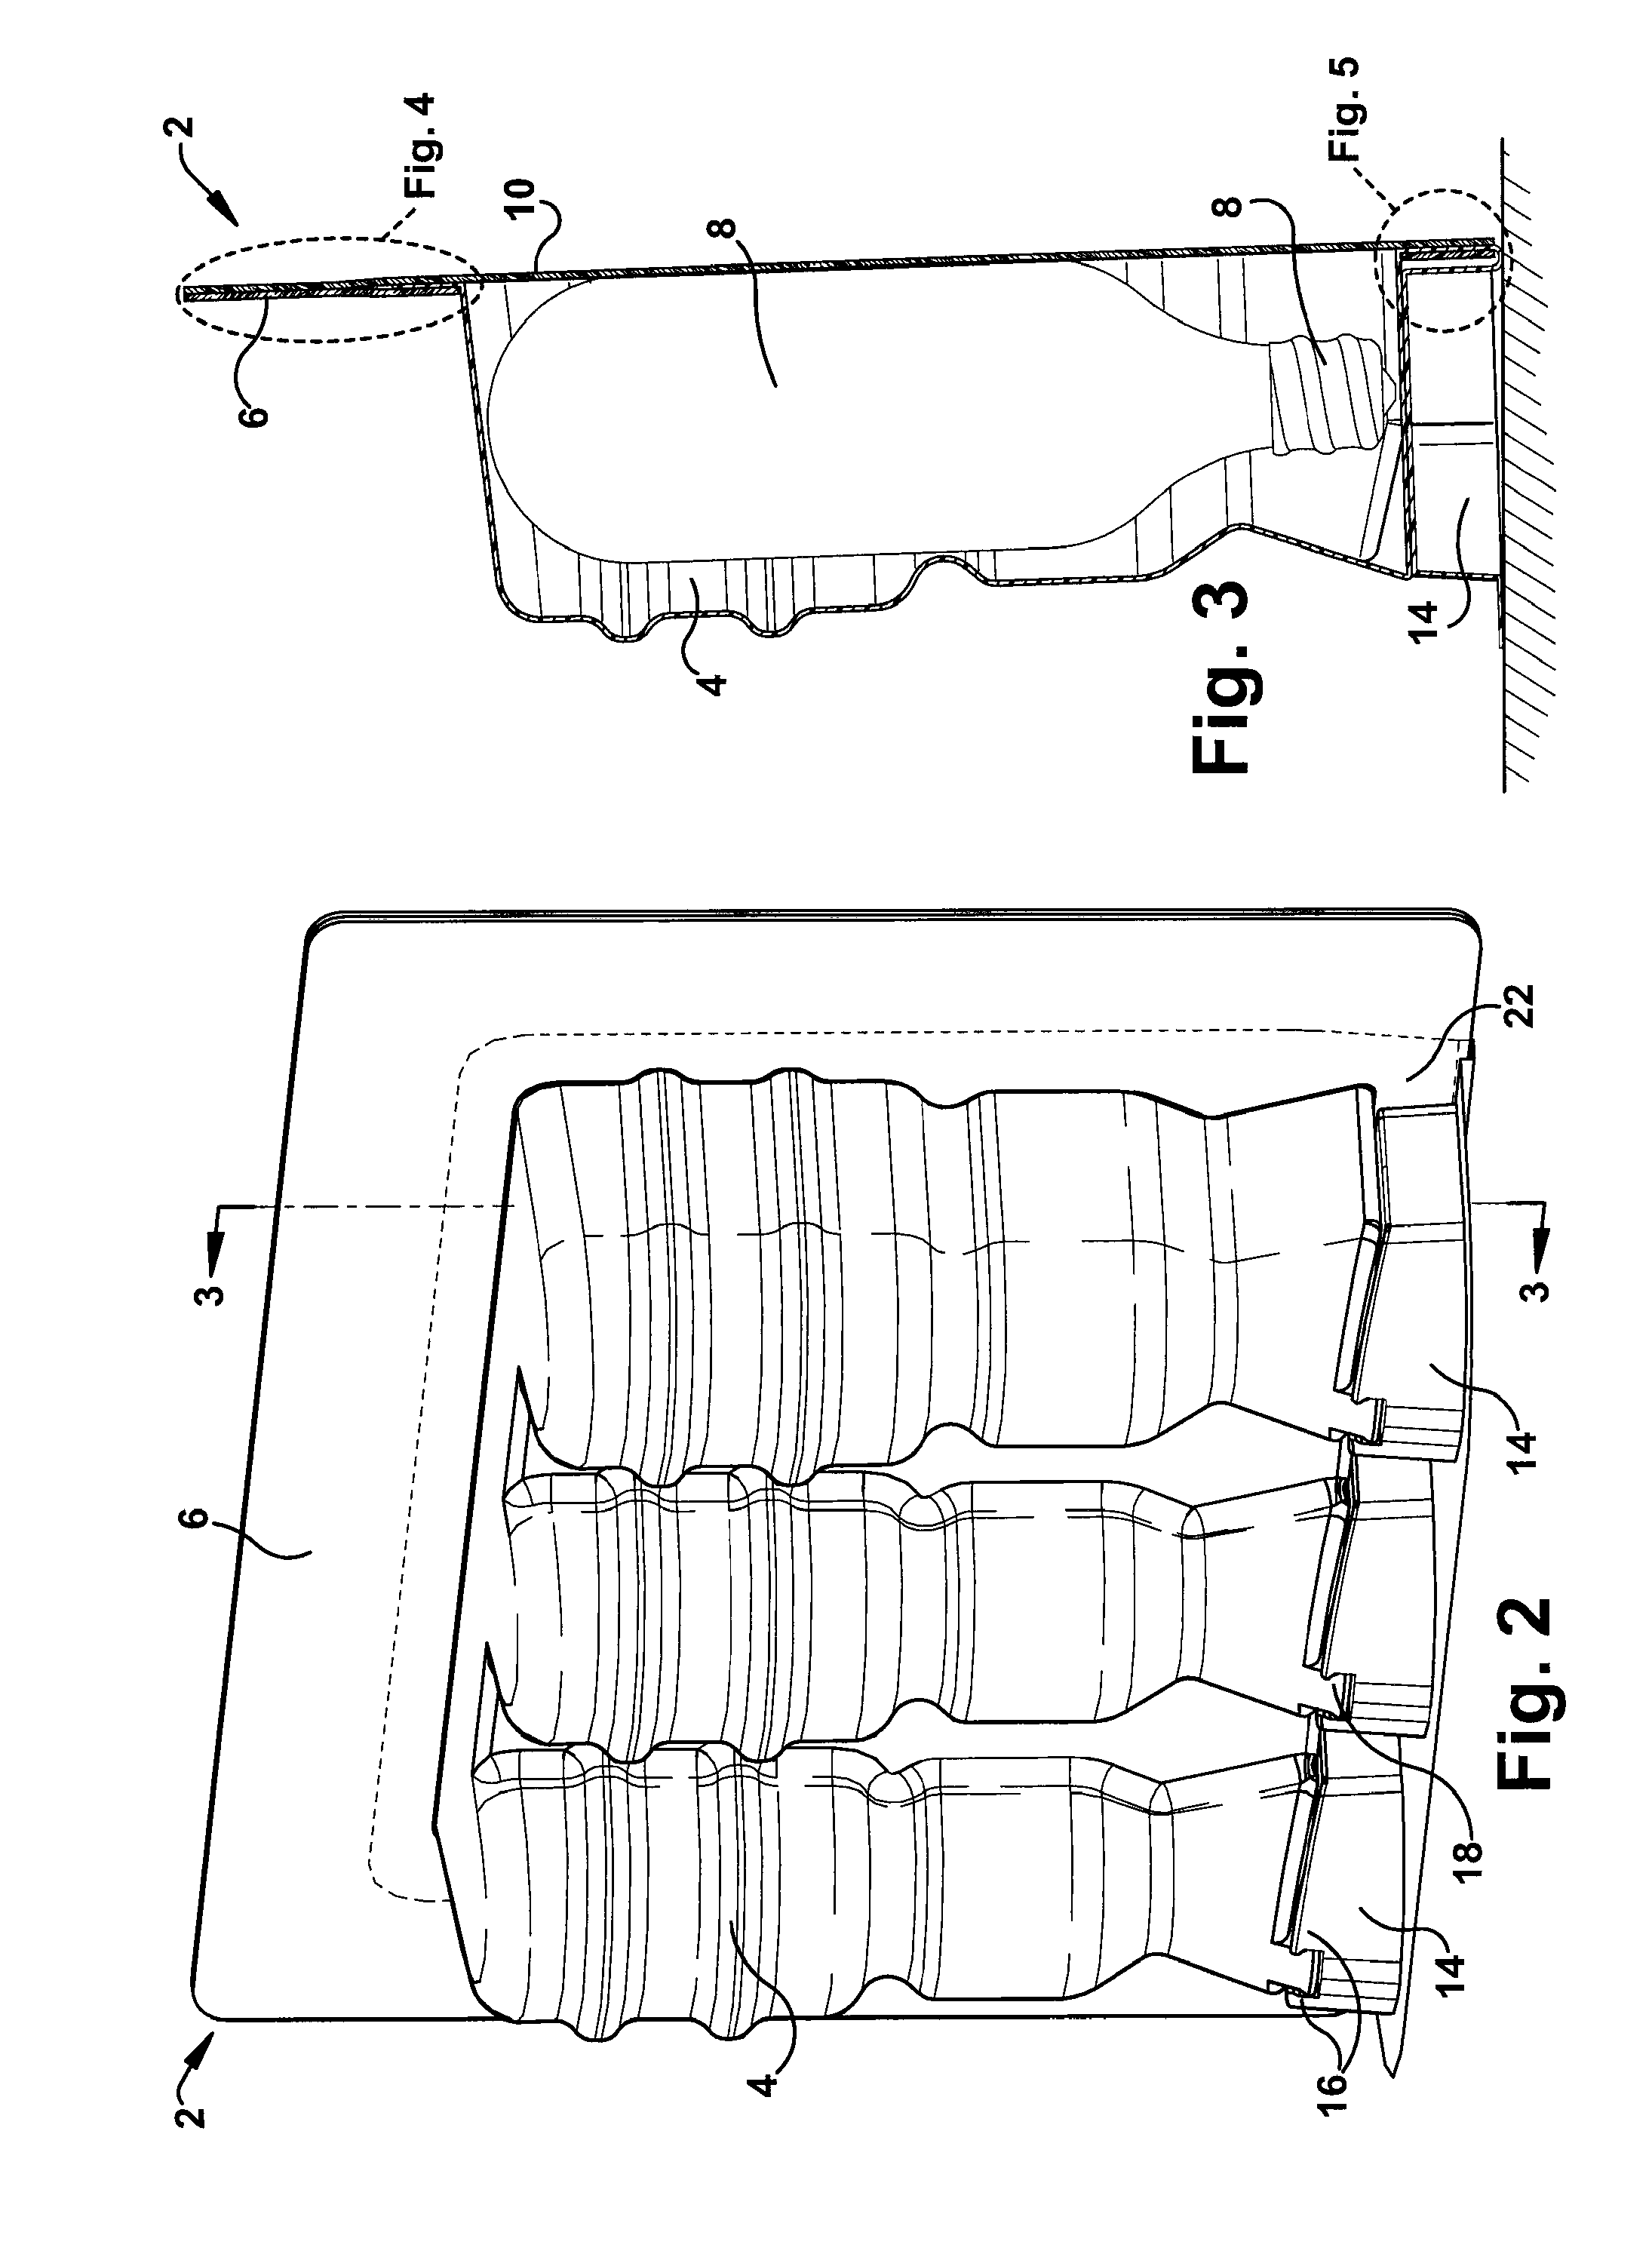 Environmentally separable packaging device with attaching base